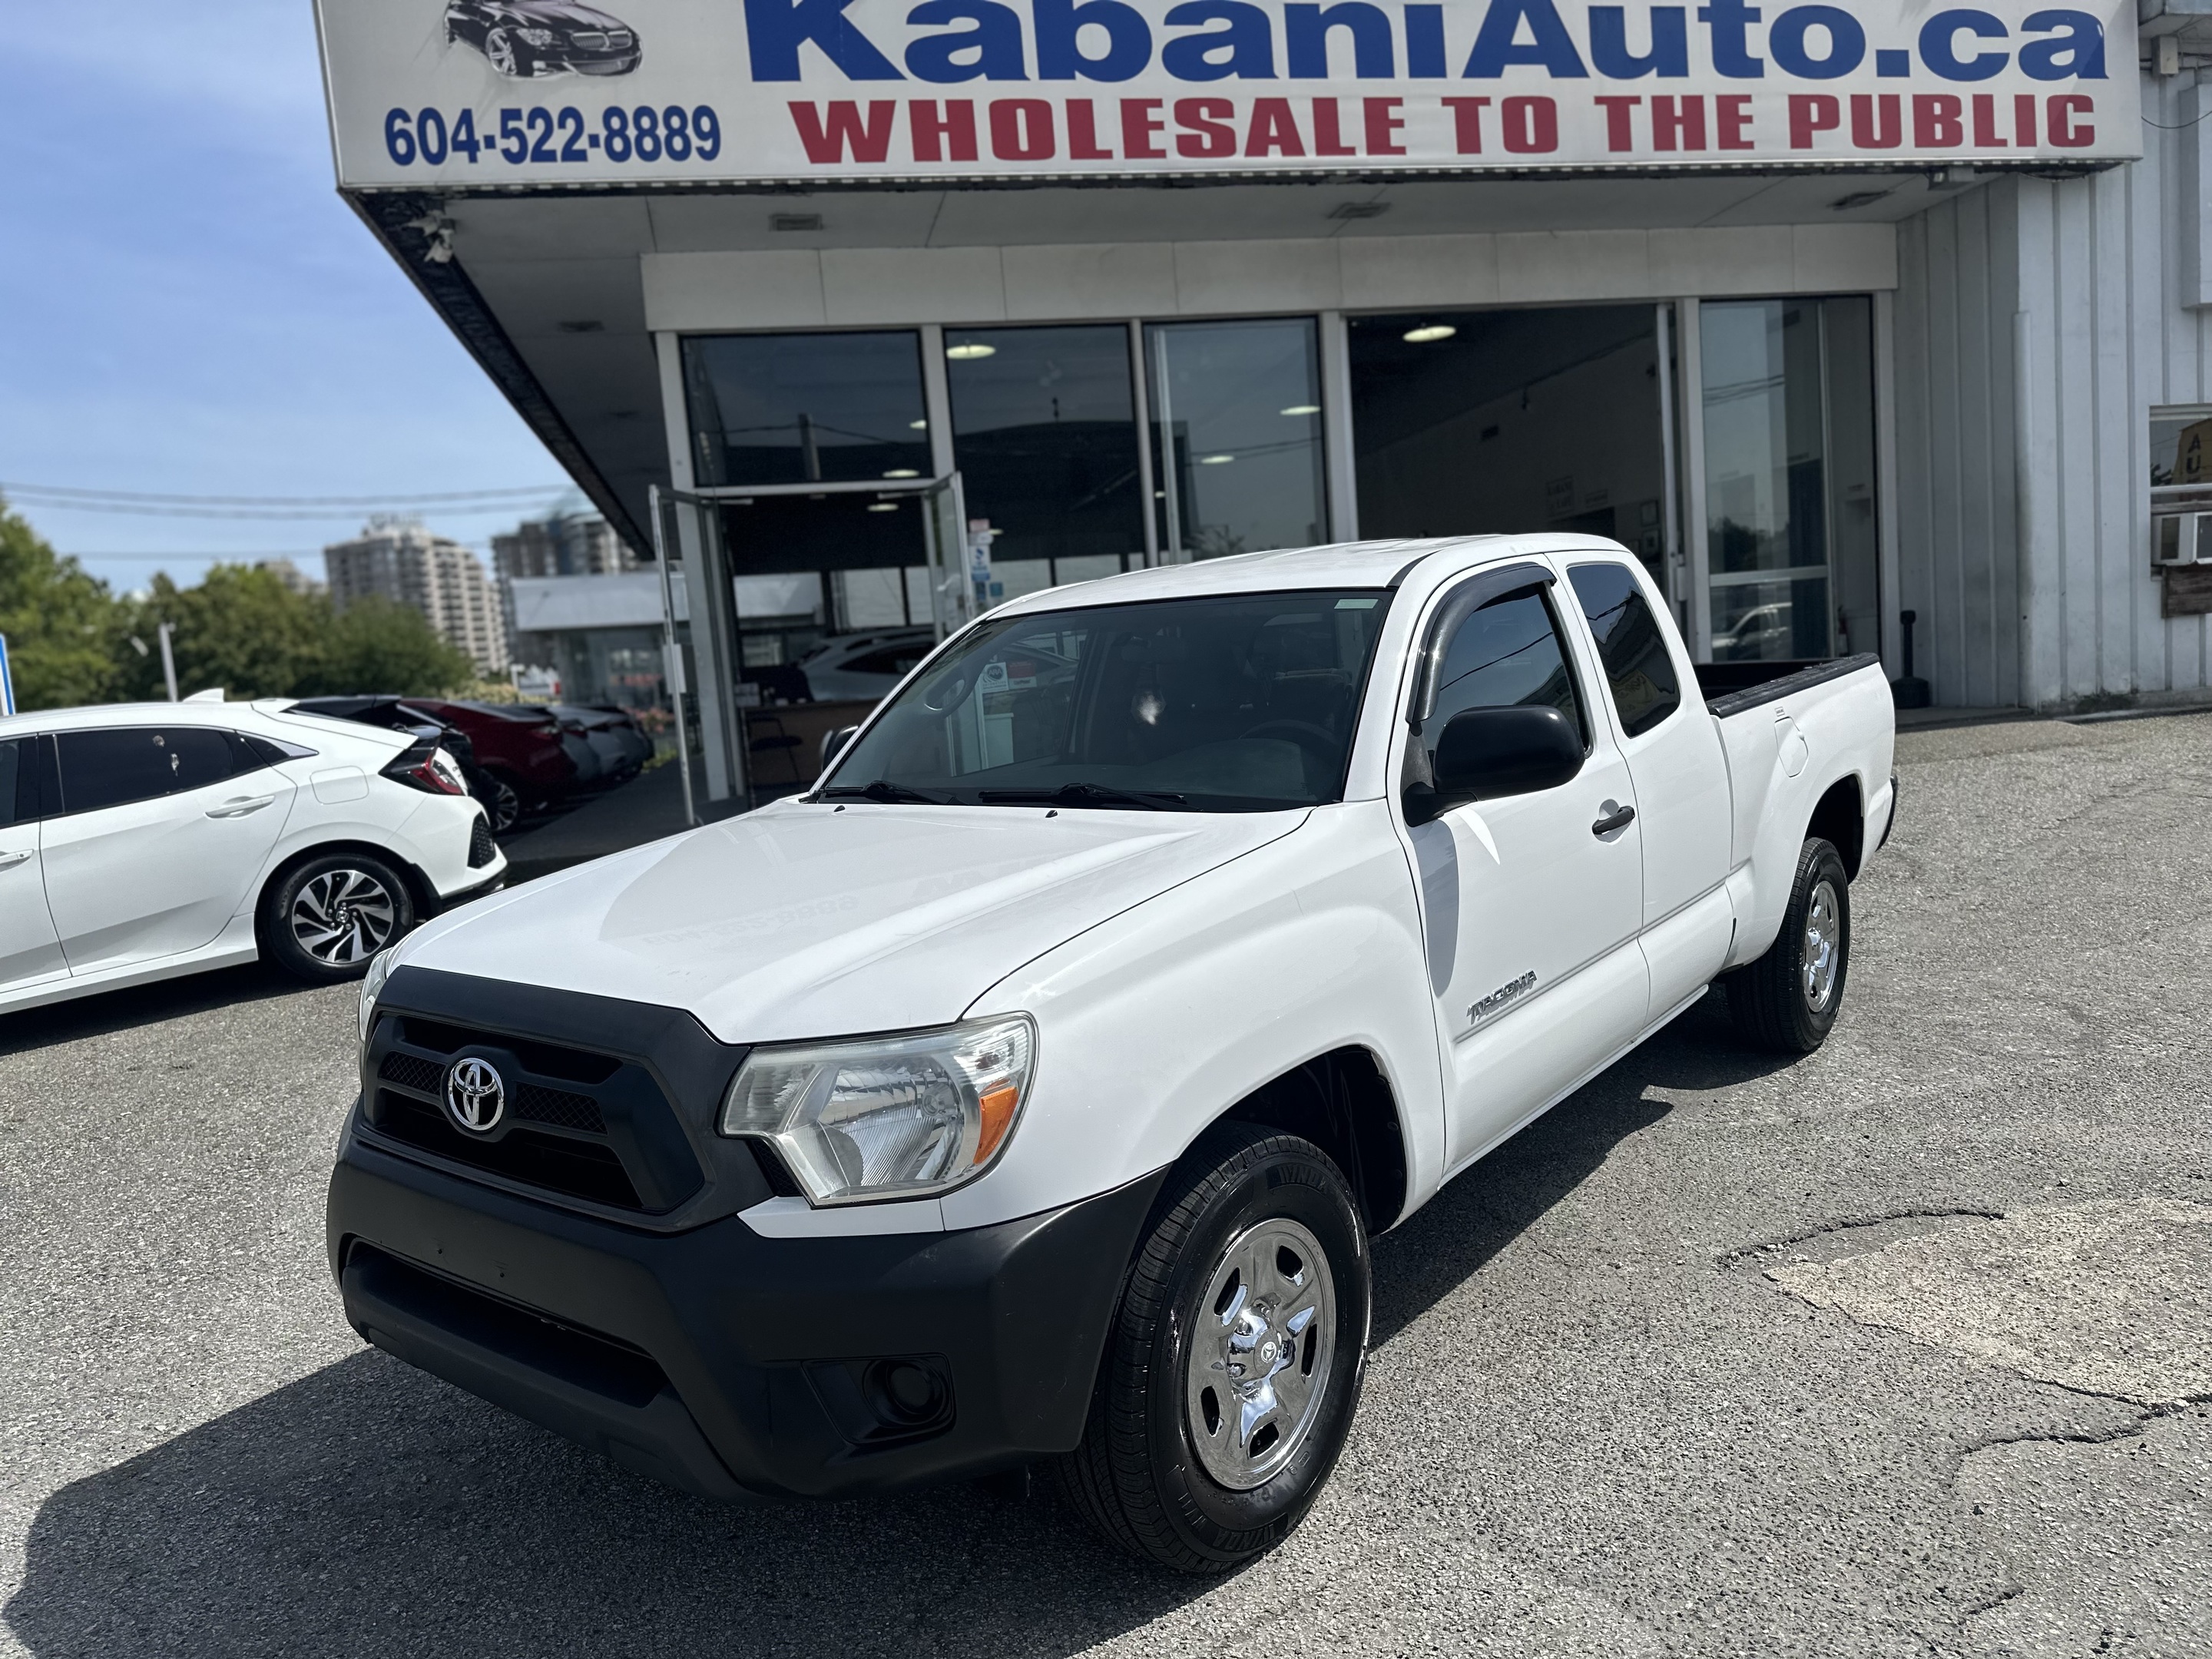 2013 Toyota Tacoma  Access Cab 4 CYL.Auto ONLY 71, 000KM 